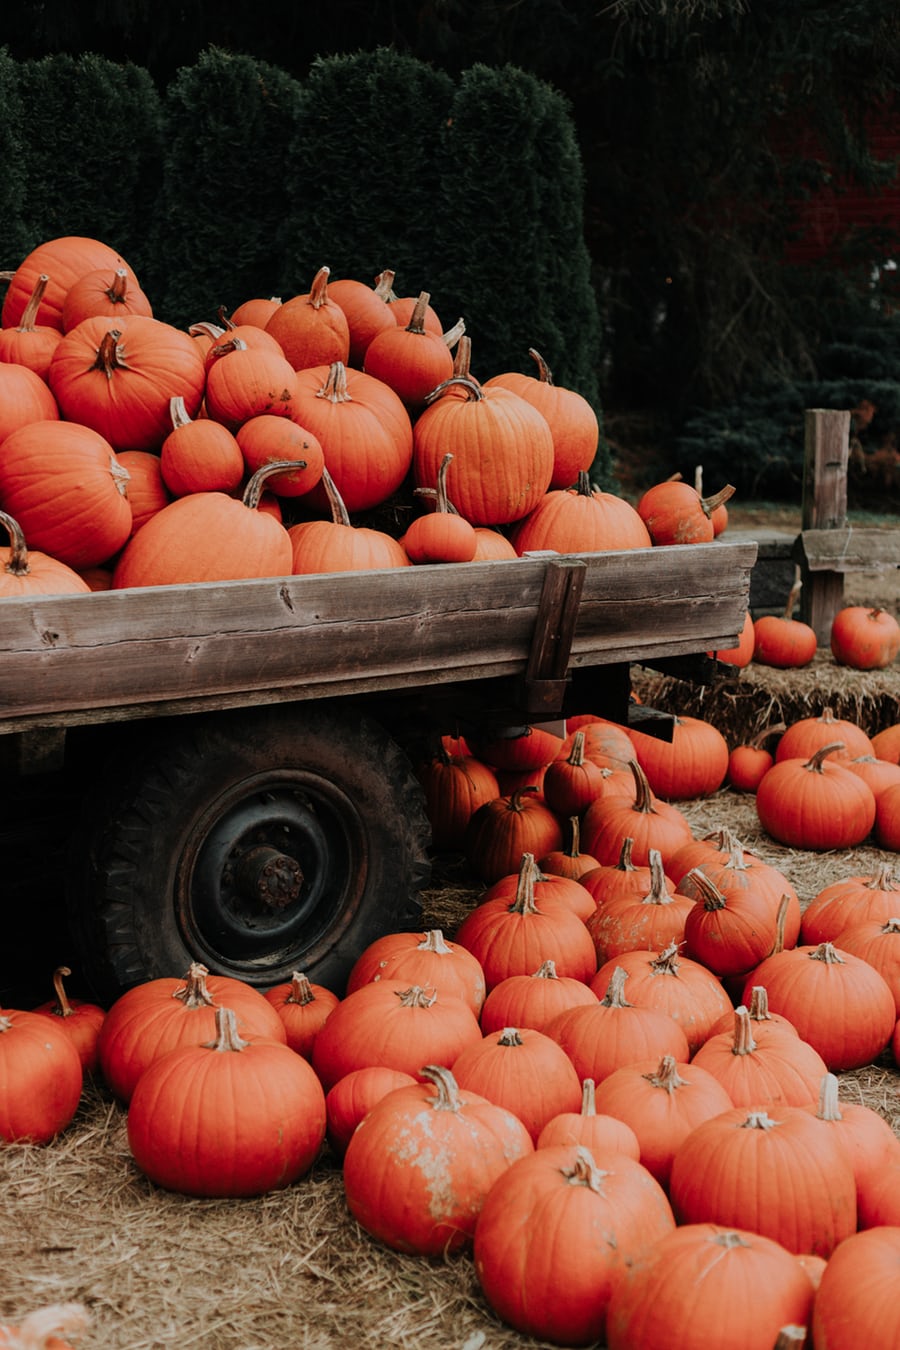  Decorating for Fall with Pumpkins in the garden